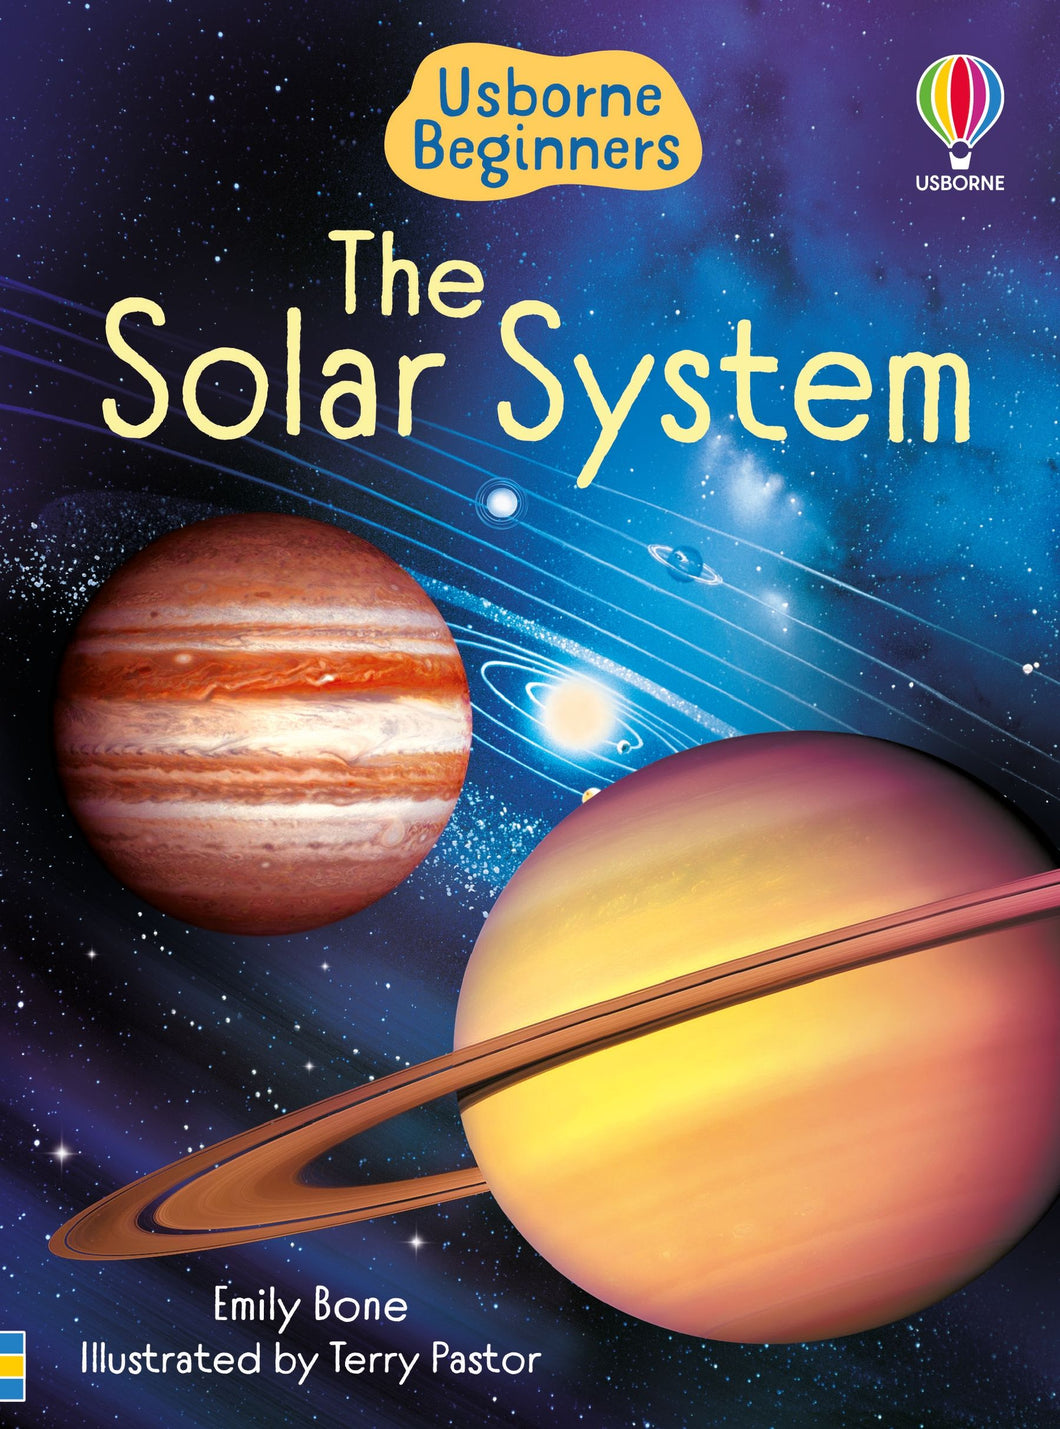 The Solar System for Beginners